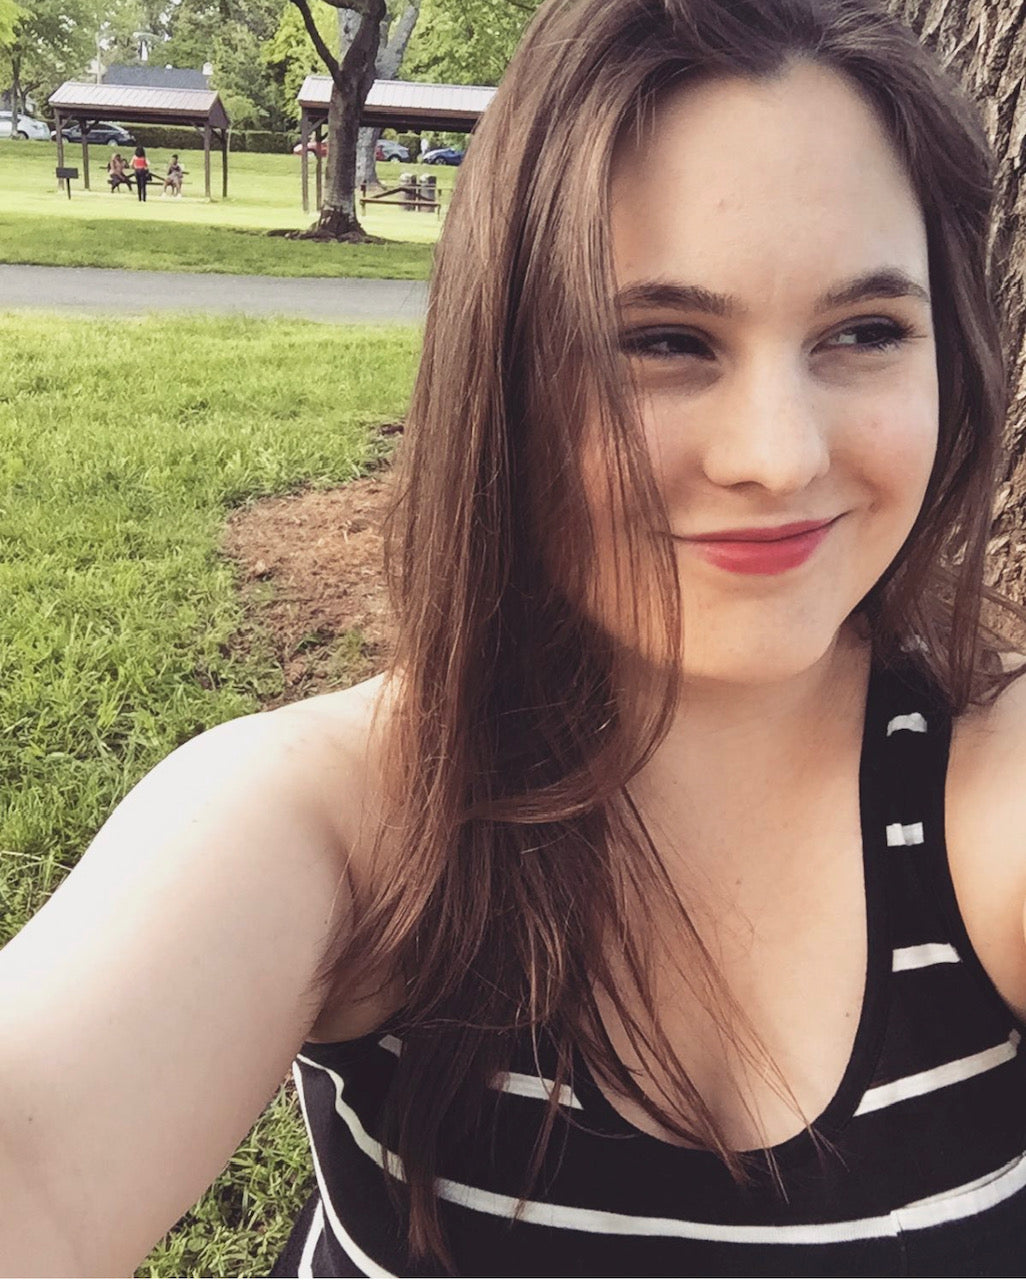 This image shows Muse team member Pam. Pam has long brunette hair and brown eyes. She is sitting in a grassy park and wearing a black and white striped tank top.